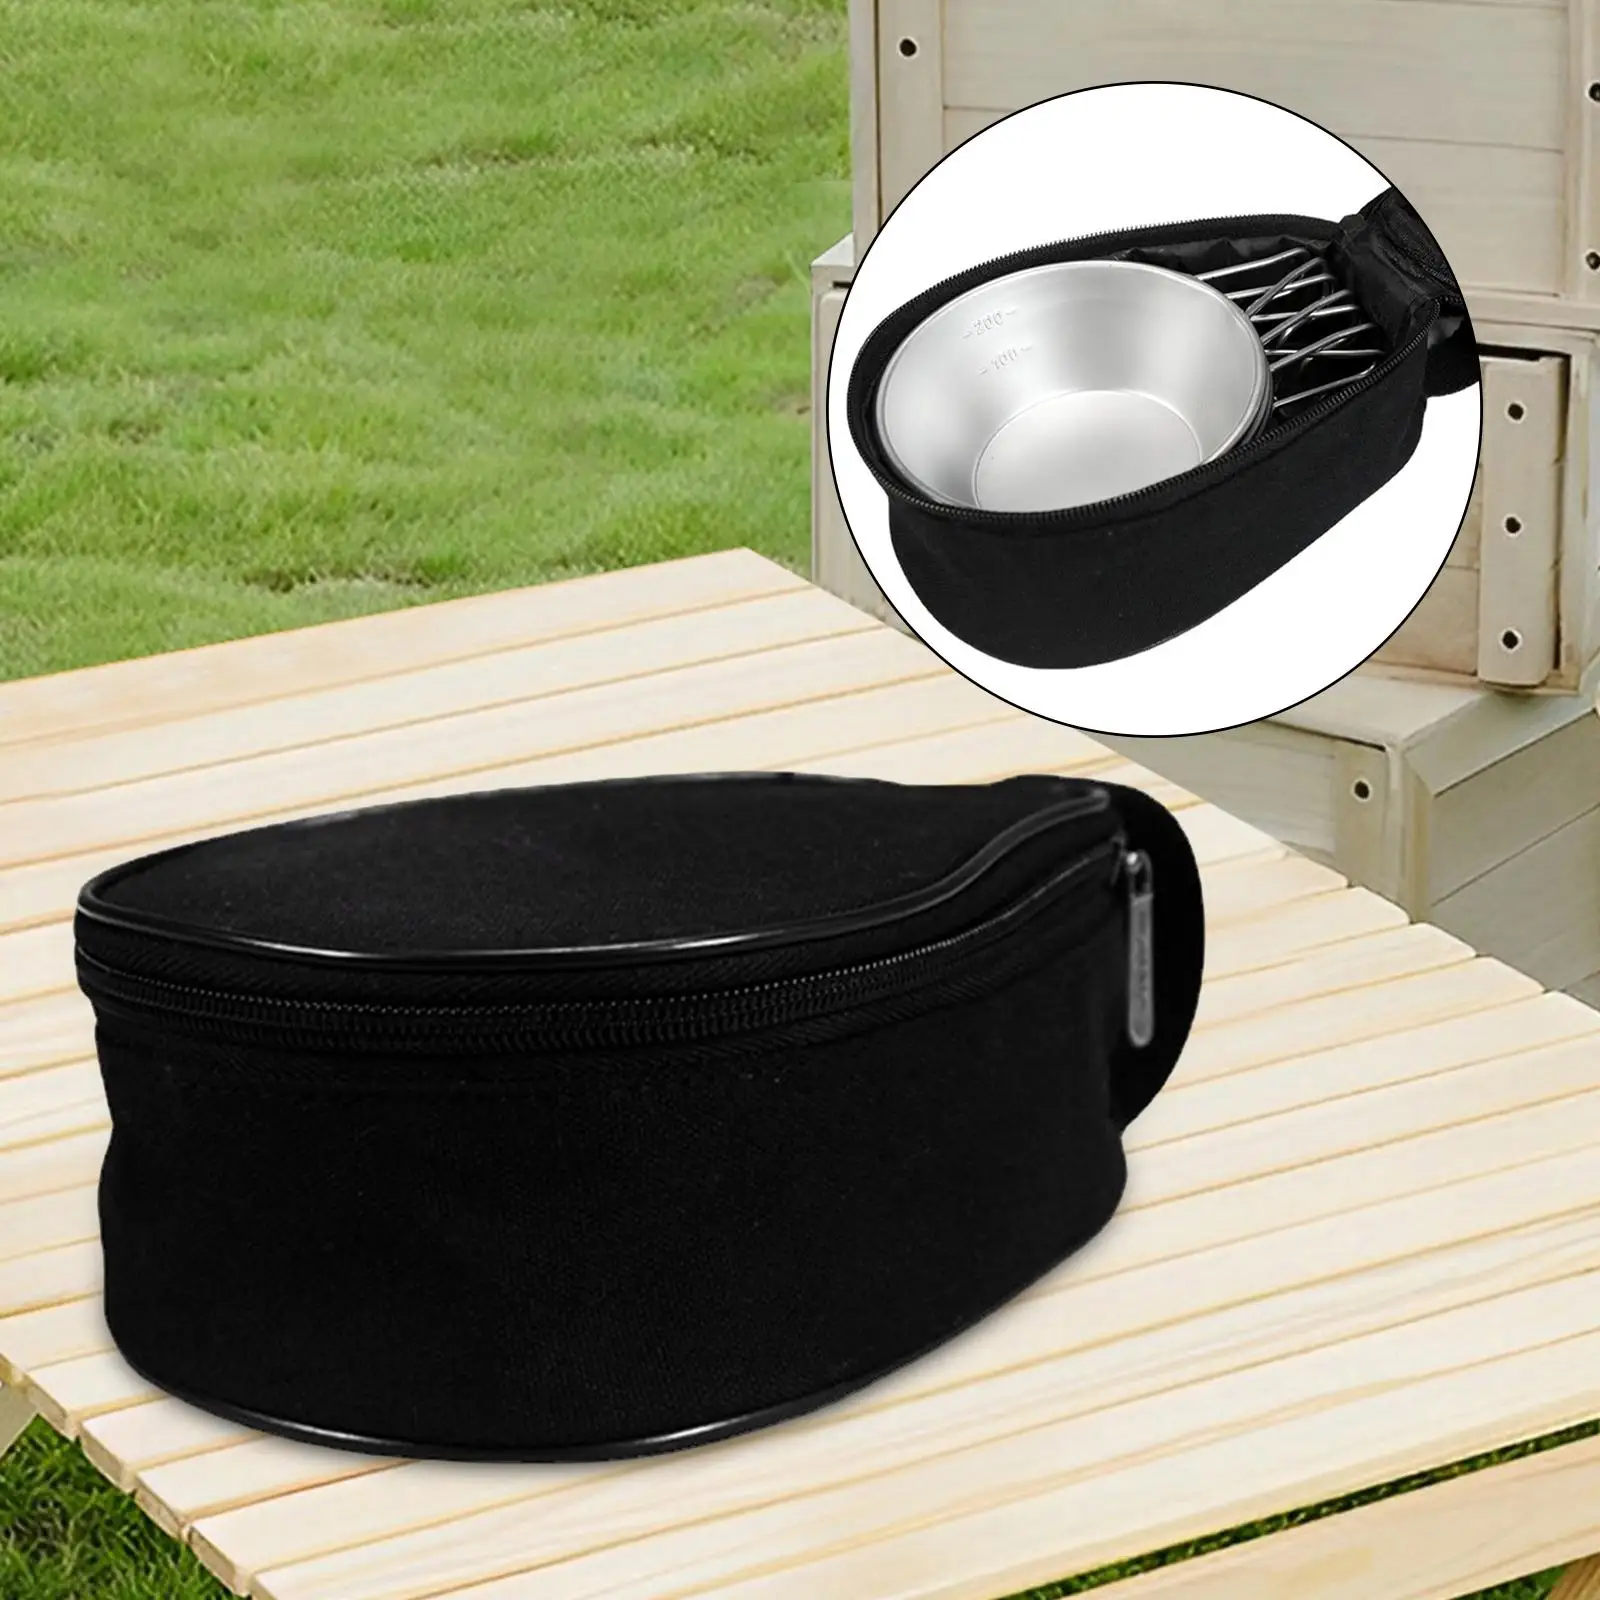 Tableware Bowl Bag Durable Carry Case Activities Waterproof for Picnic Beach